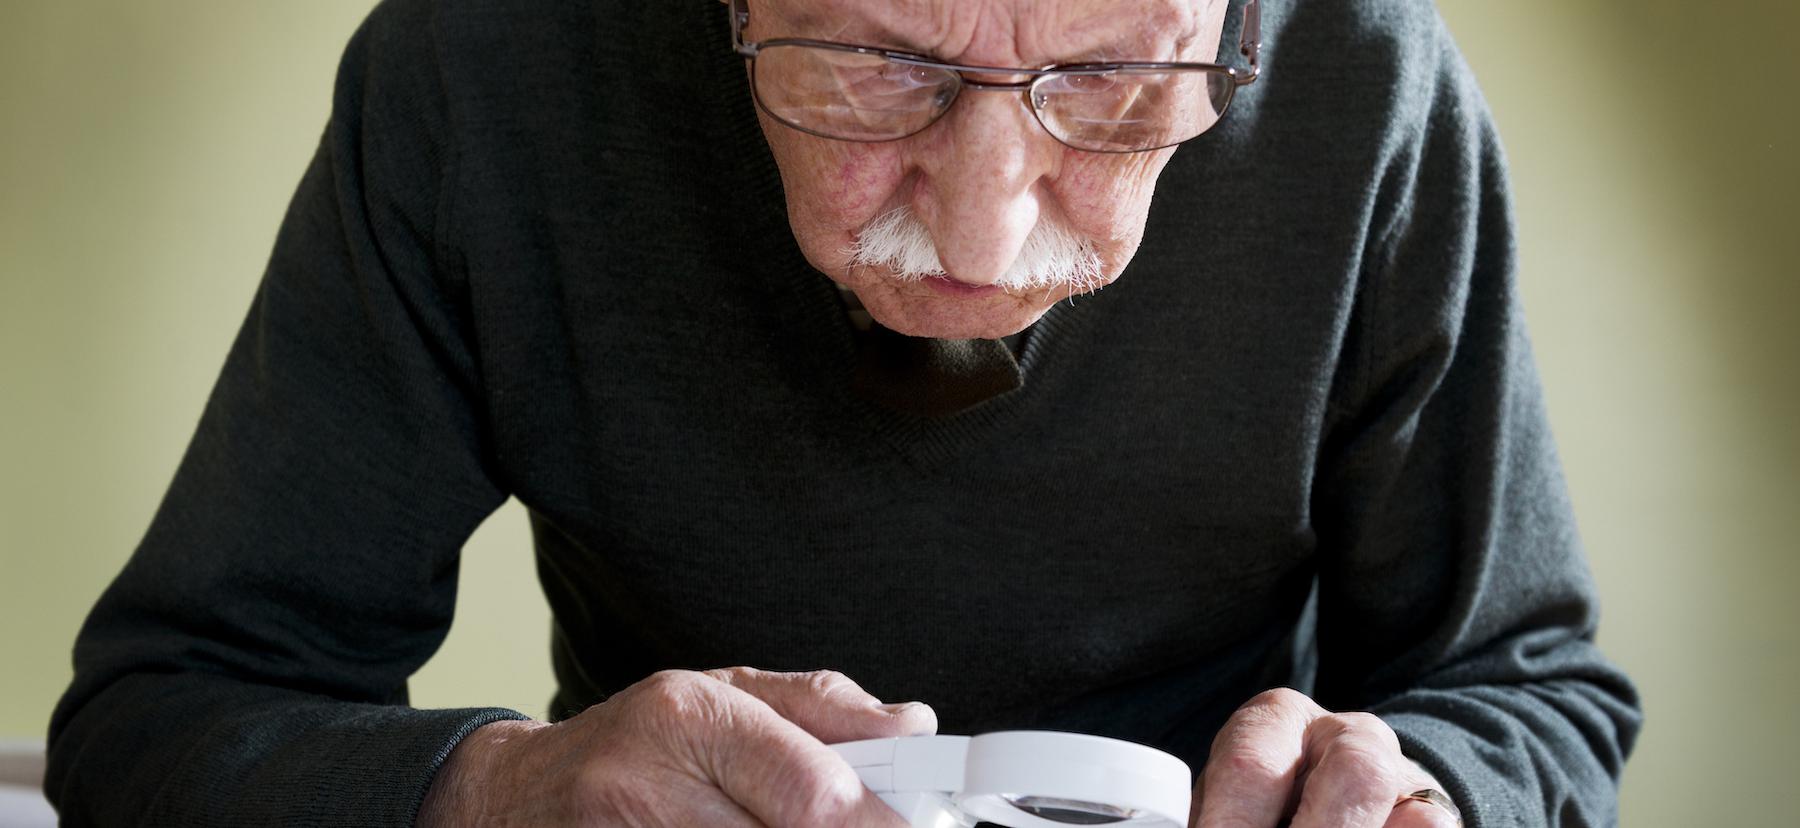 Image of an older male looking at a newspaper using a magnifying glass